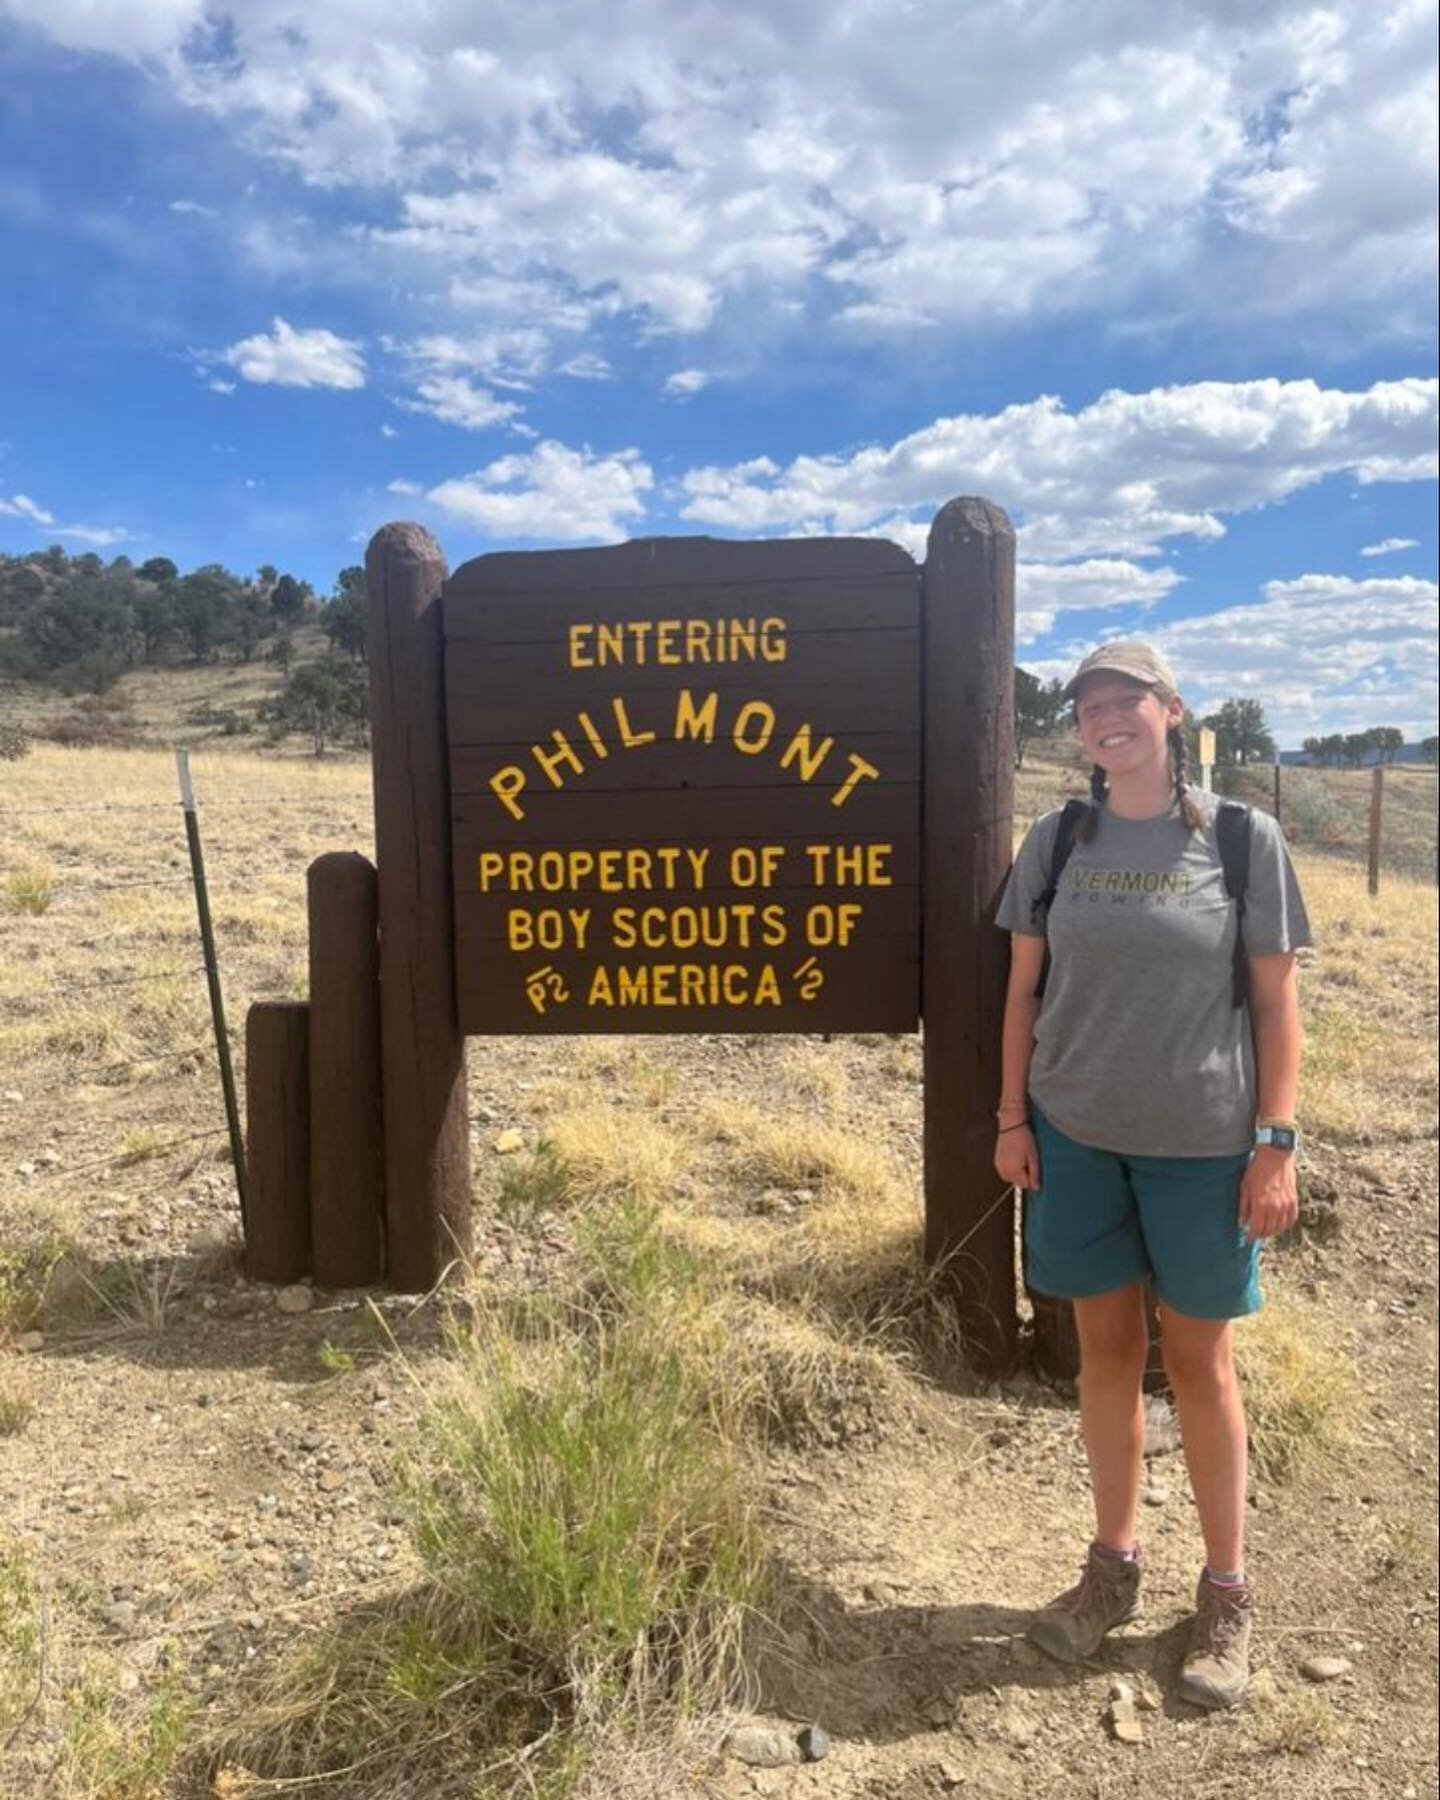 What is VTR doing this summer?

Royce Ankel &lsquo;25 is a ranger at Philmont, a boy scout range in New Mexico. While in Philmont, she leads backpacking trips while sporting her vermont rowing gear!